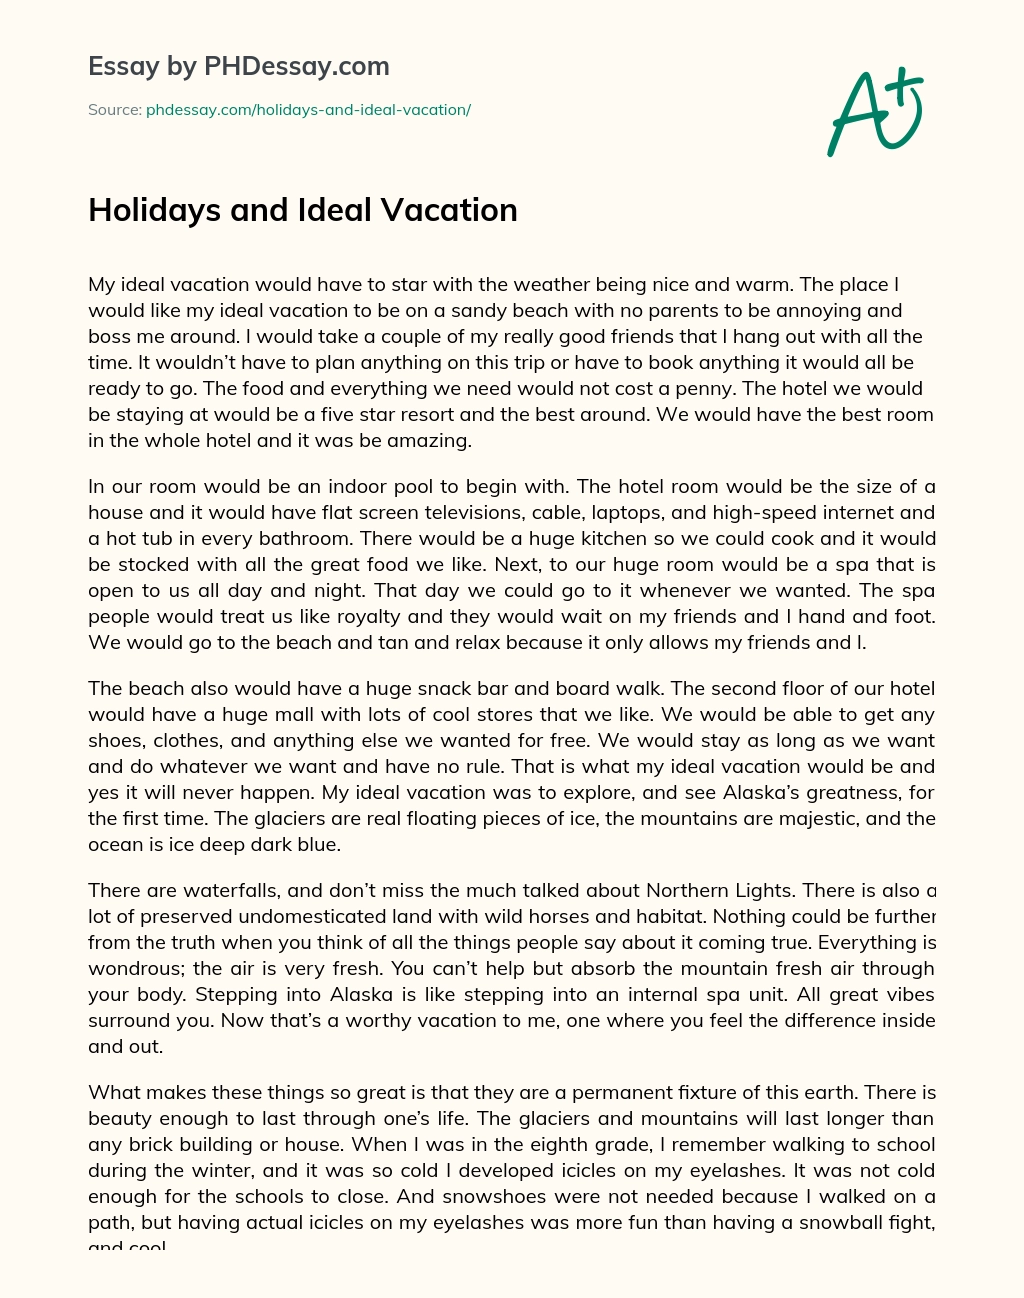 Holidays and Ideal Vacation essay